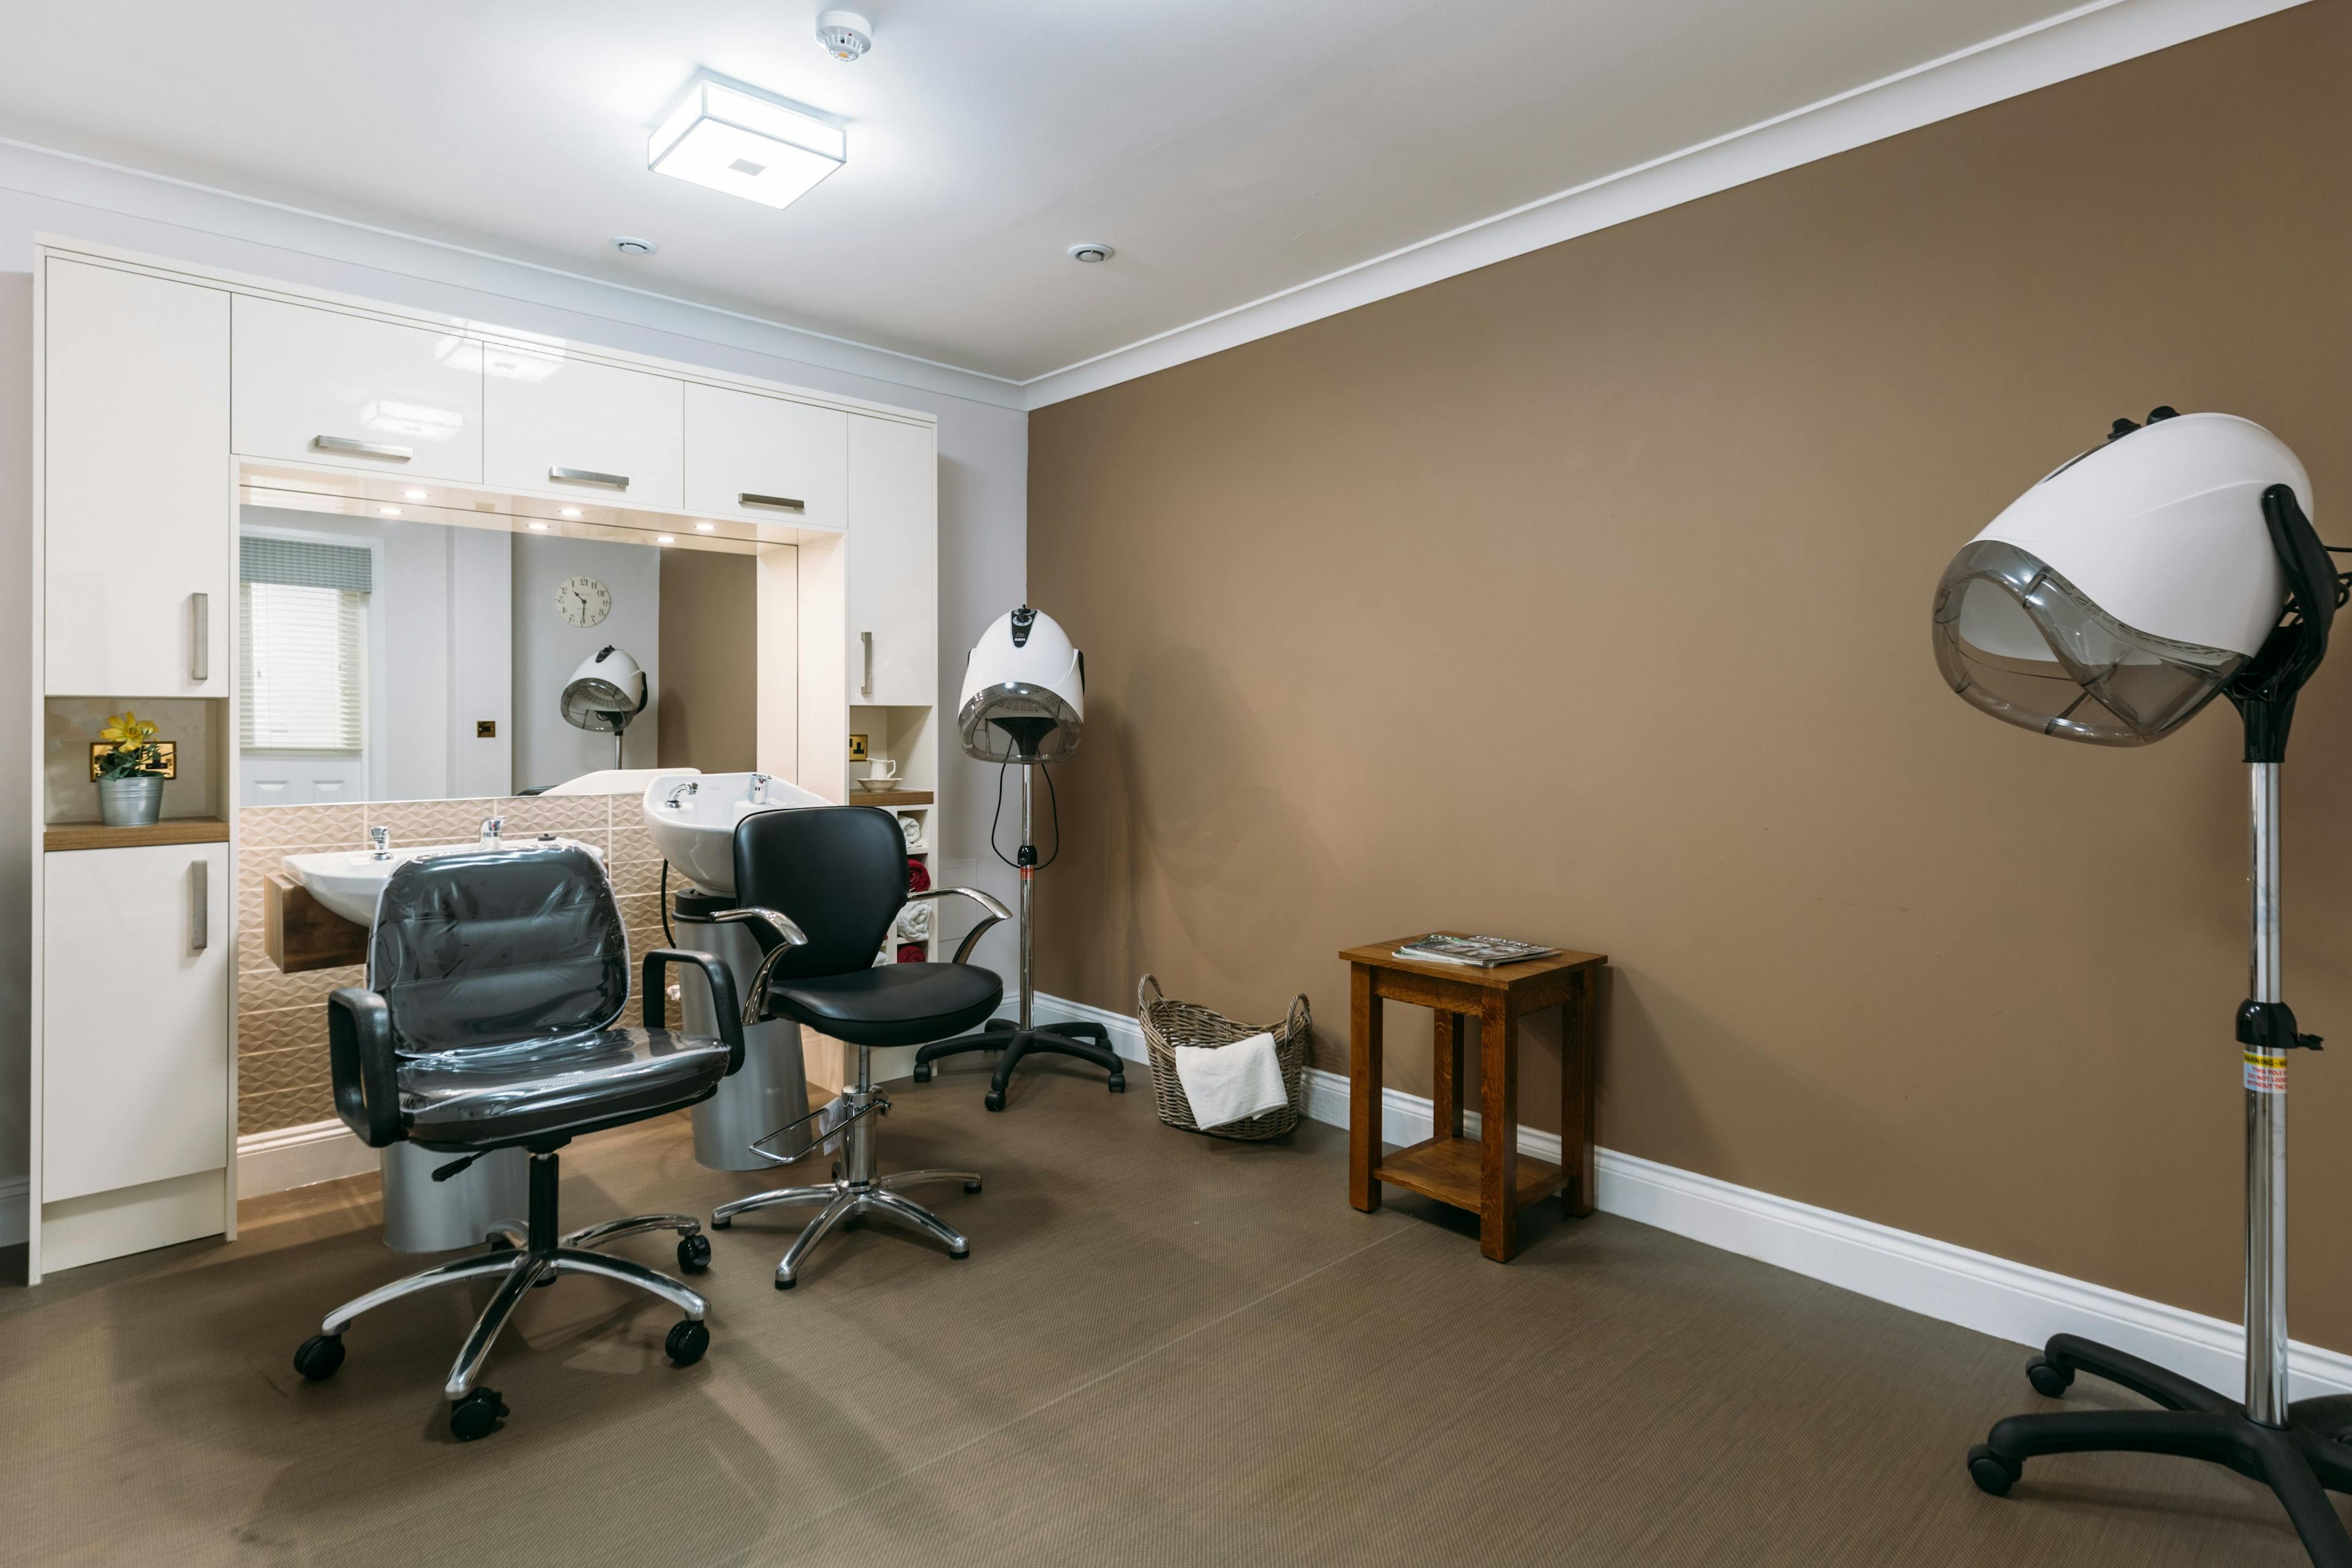 Salon in Orchard House Care Home in Newport, Isle of Wight